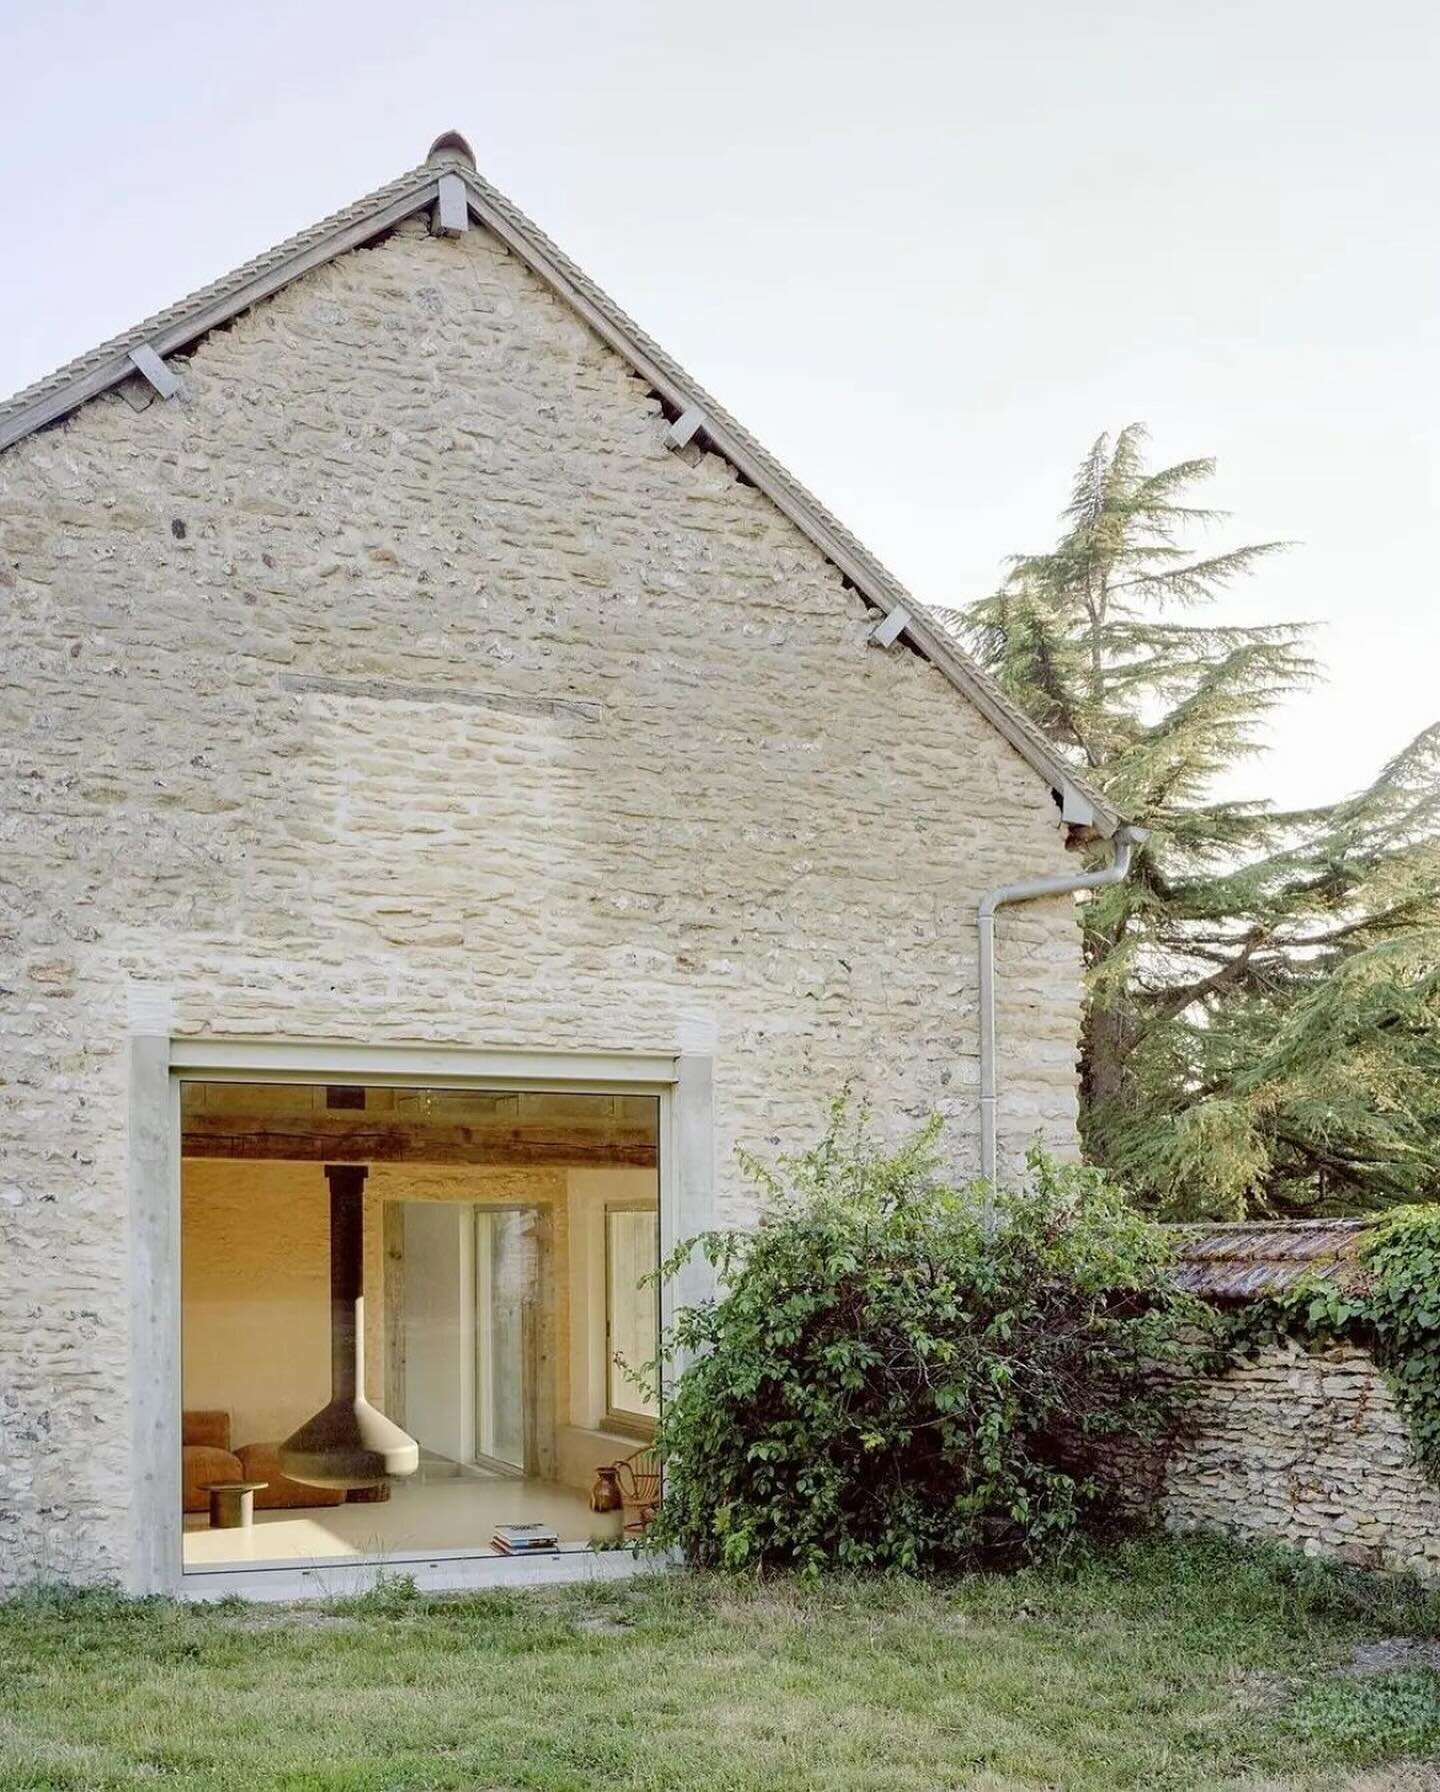 Country House in Normandy by @studio_guma, photo by @maxdelv ❣︎
&bull;
&bull;
&bull;
#architecturaldigest #architecturalporn #calminghomes #dailyinspiration #designinspo #houseoftheday #moderndesign #neutralhomes #neutraltones #residentialdesign #res